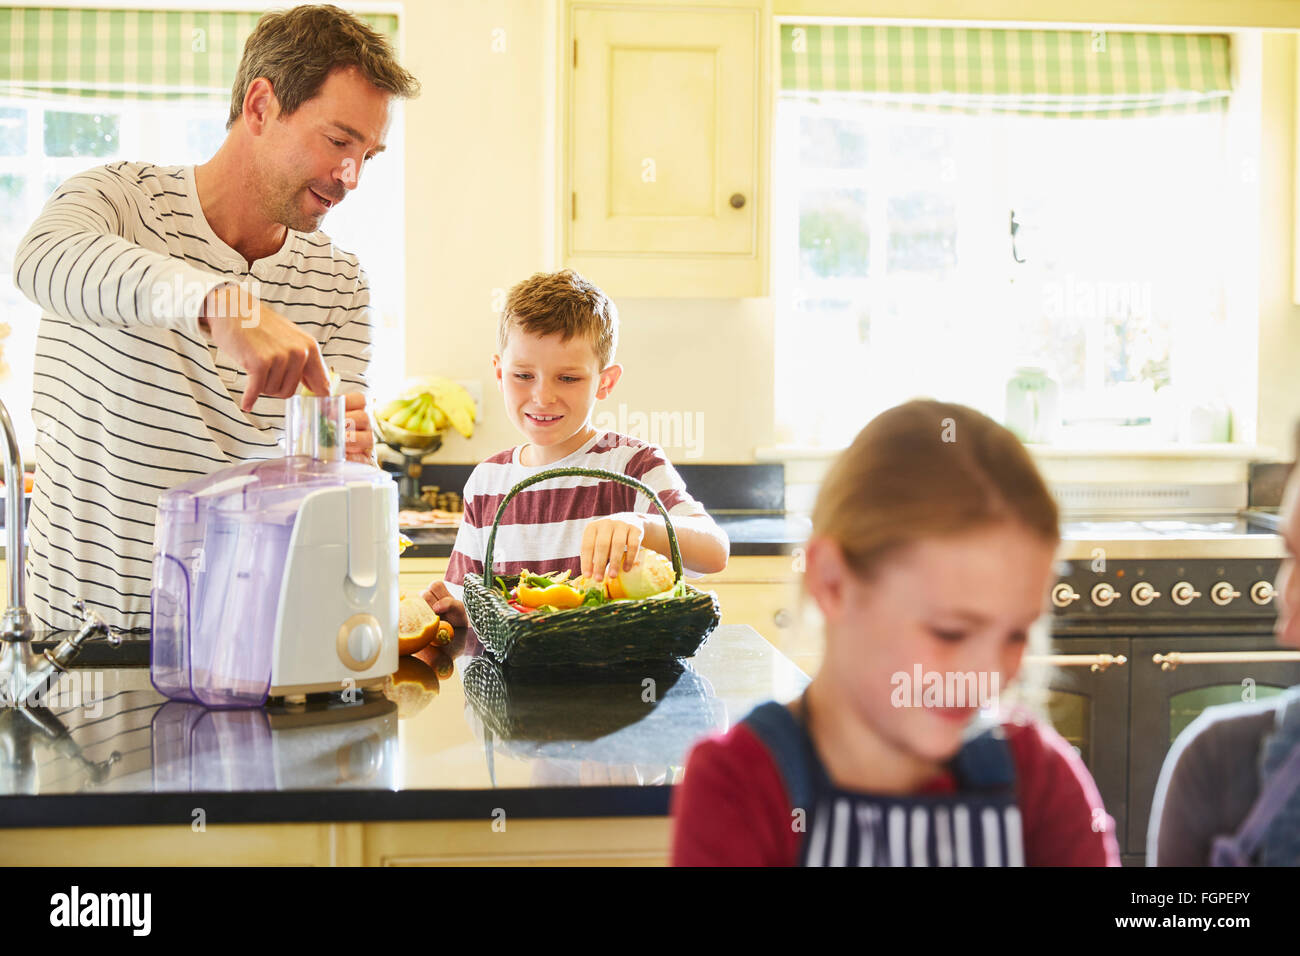 Father and son juicing vegetables in kitchen Stock Photo